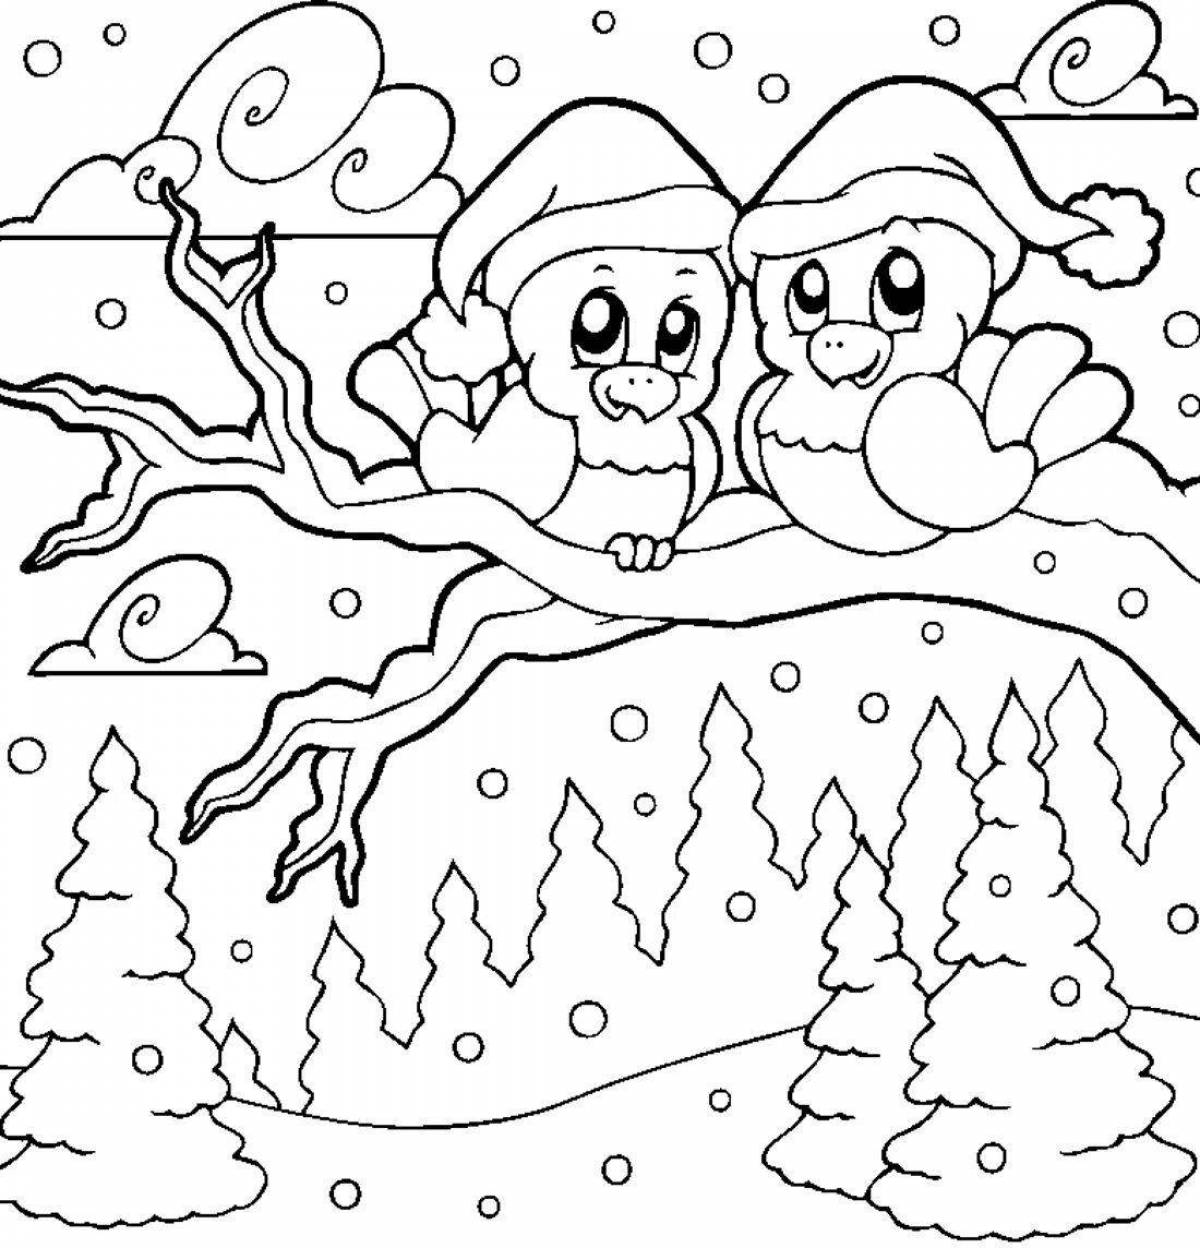 Coloring page blissful winter landscape